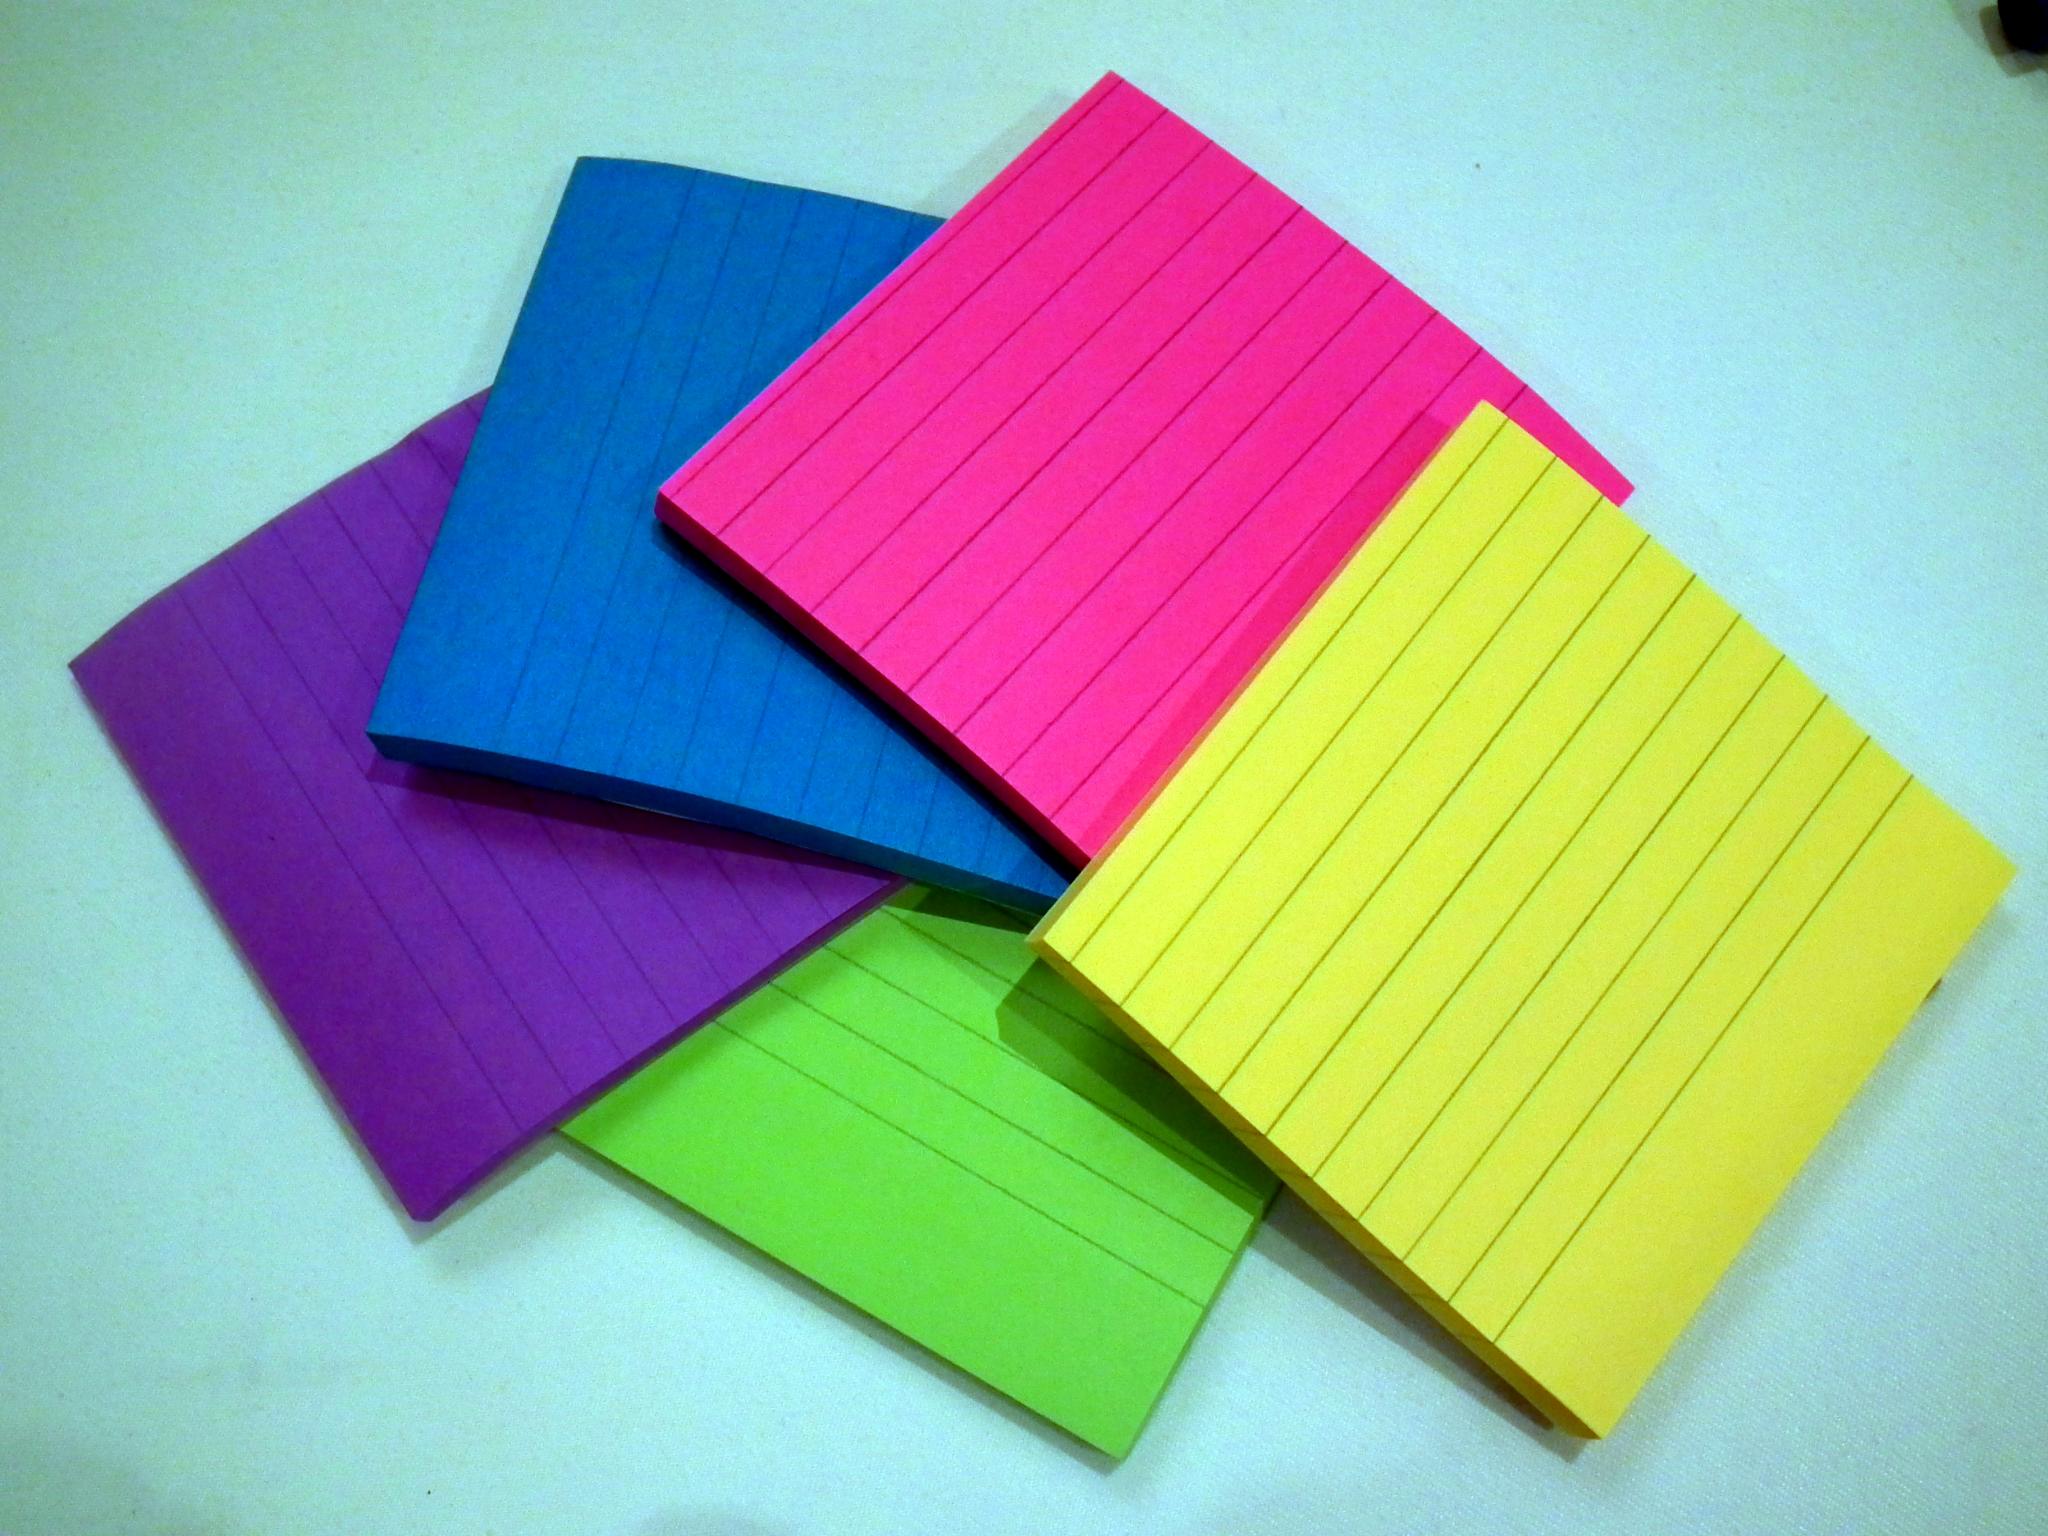 File:Sticky Notes in different colors.jpg - Wikimedia Commons